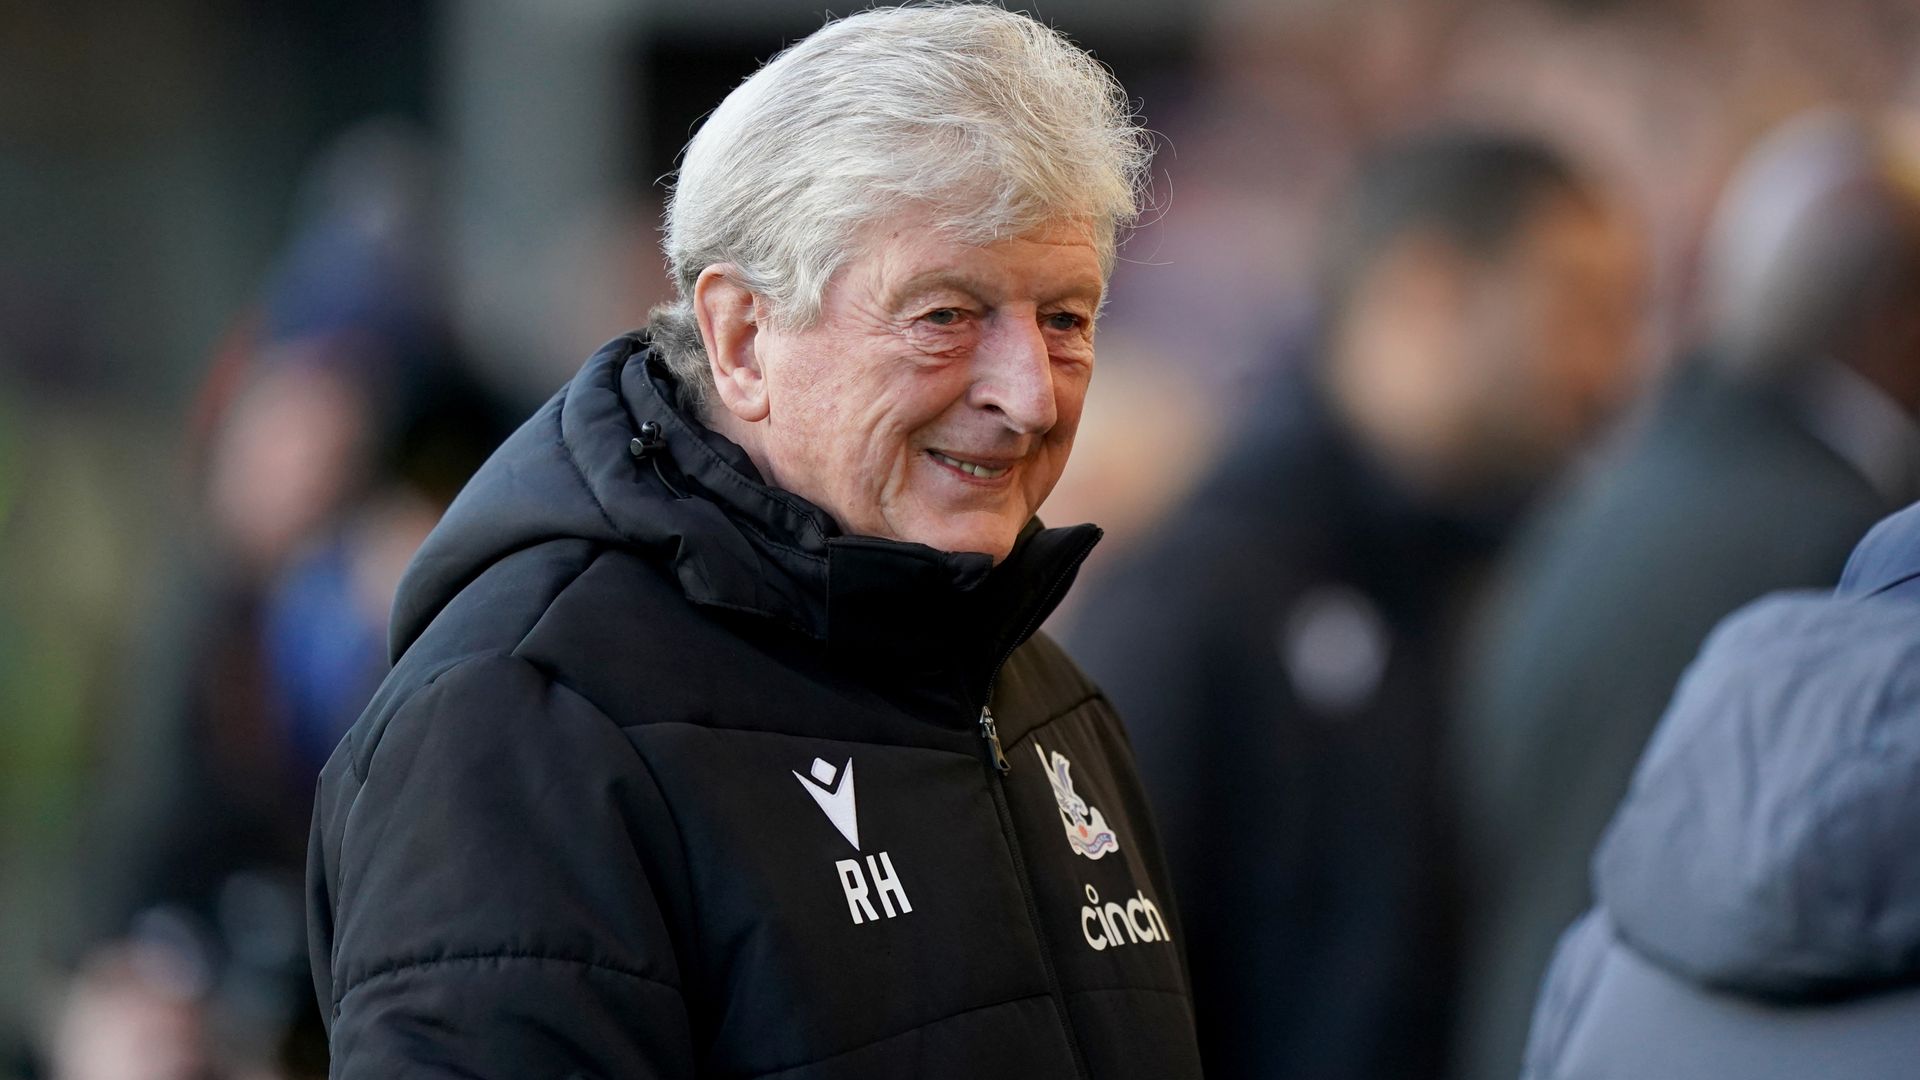 Hodgson stable in hospital after being taken ill at training